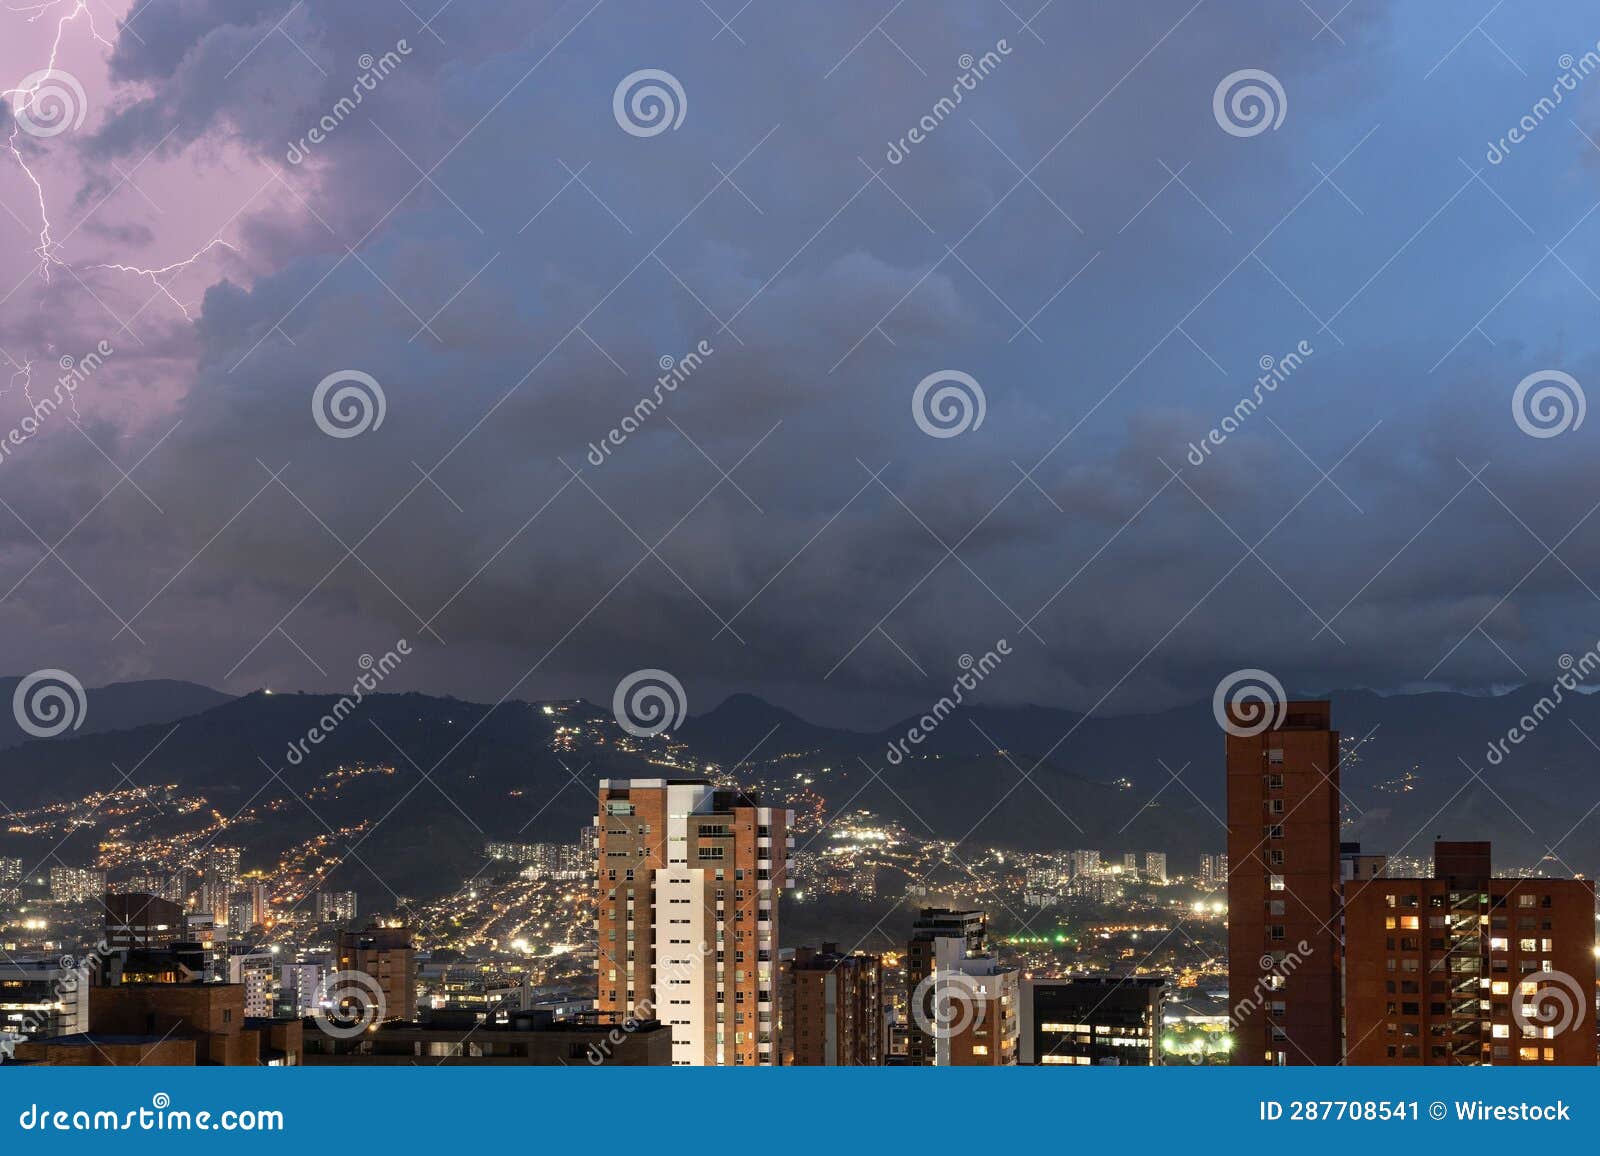 Aerial View Of The City Of Medellin Colombia At Night During A